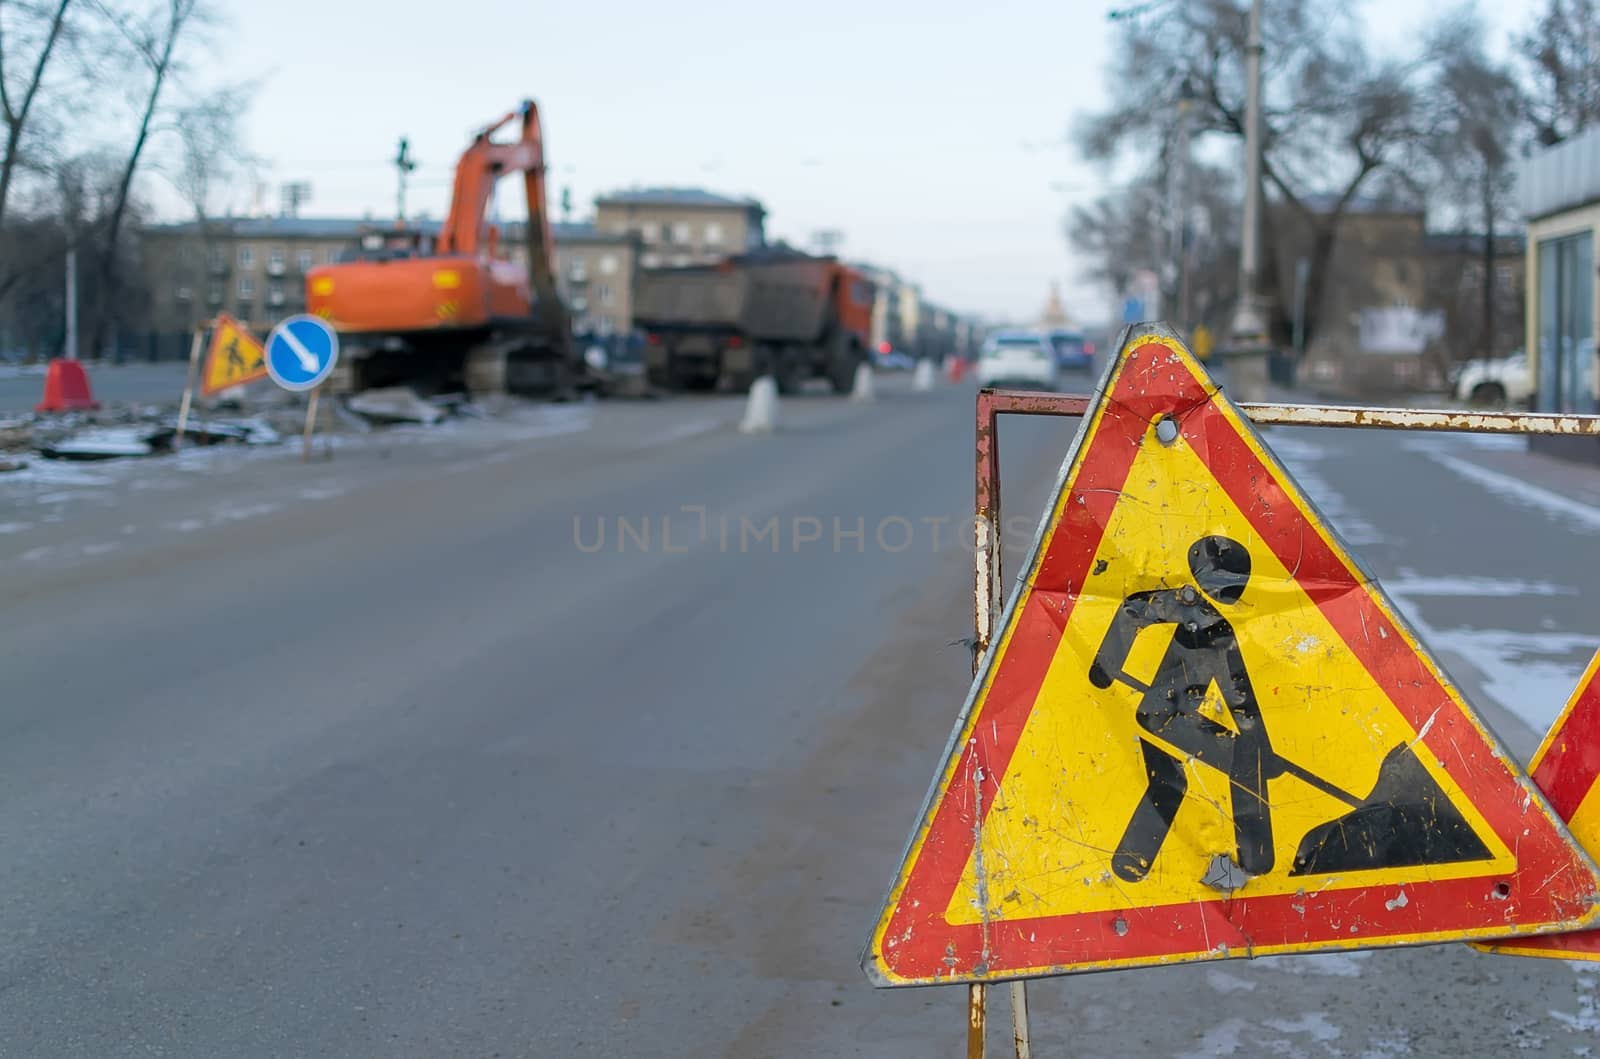 Traffic signs, detour, road repair on the background of the street and the excavator who digs the pit